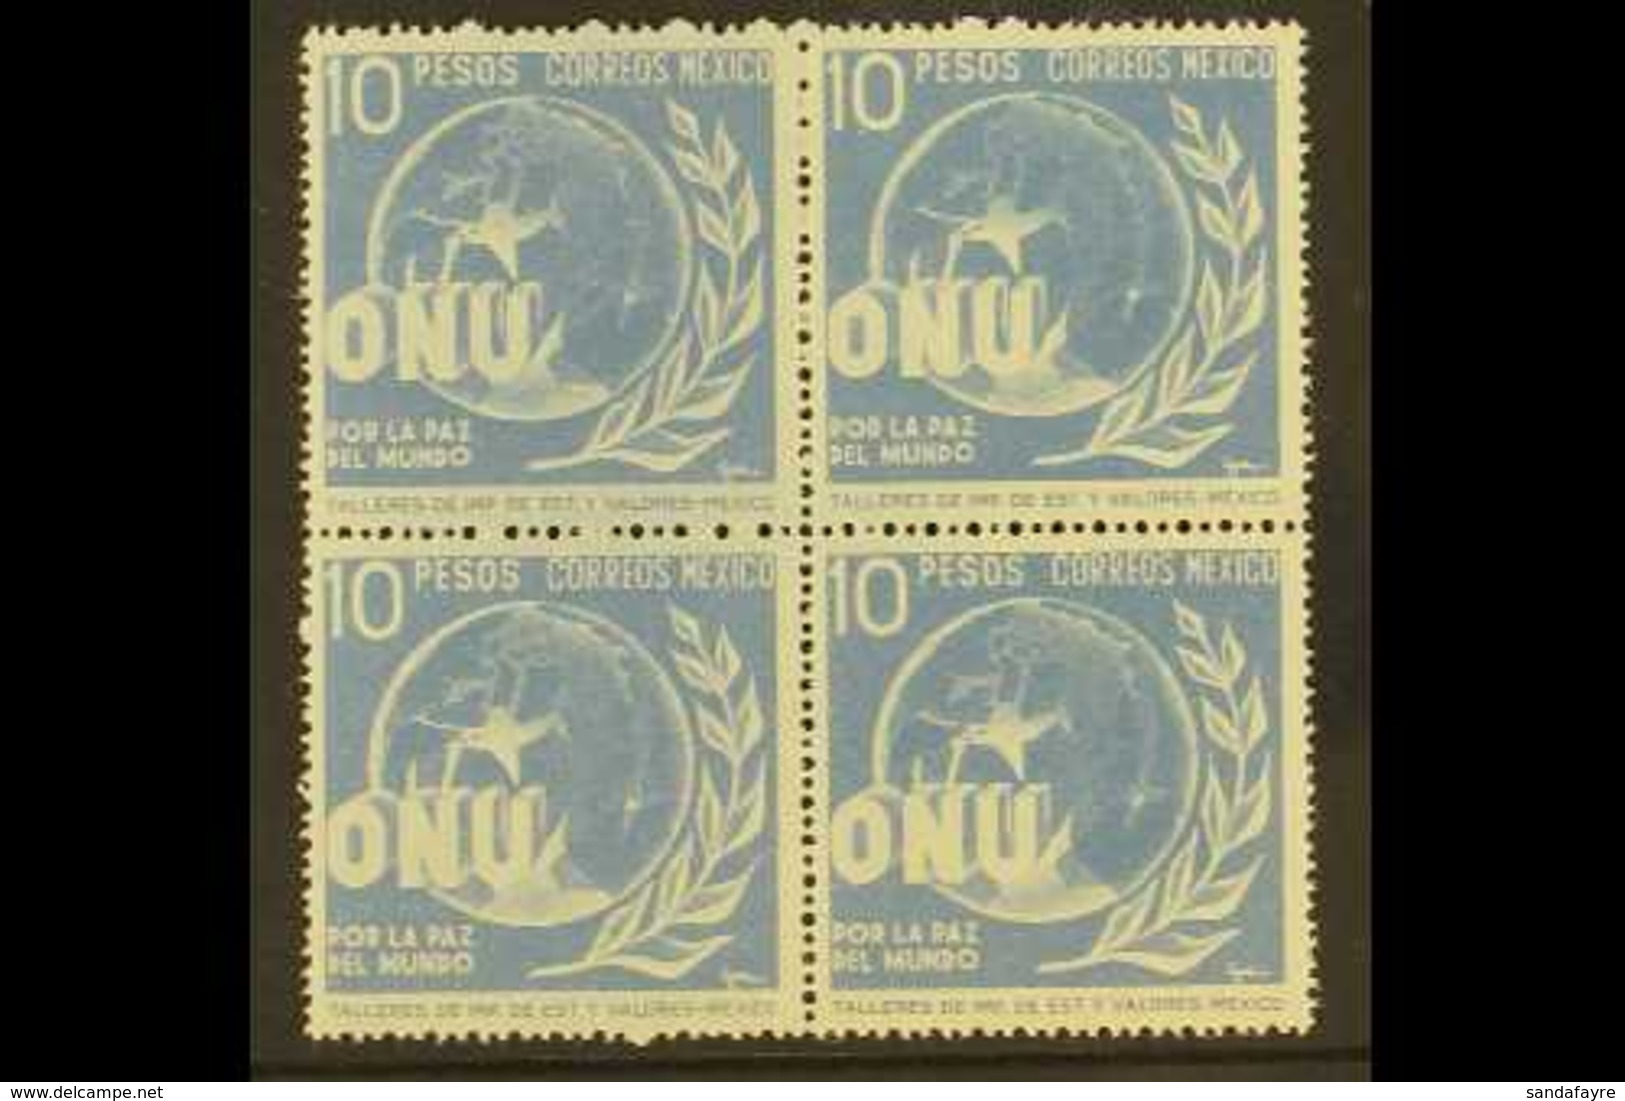 1946 10 Peso Ultramarine "United Nations", SG 771, Scott 818, Never Hinged Mint Block Of 4 (4 Stamps) For More Images, P - Mexique